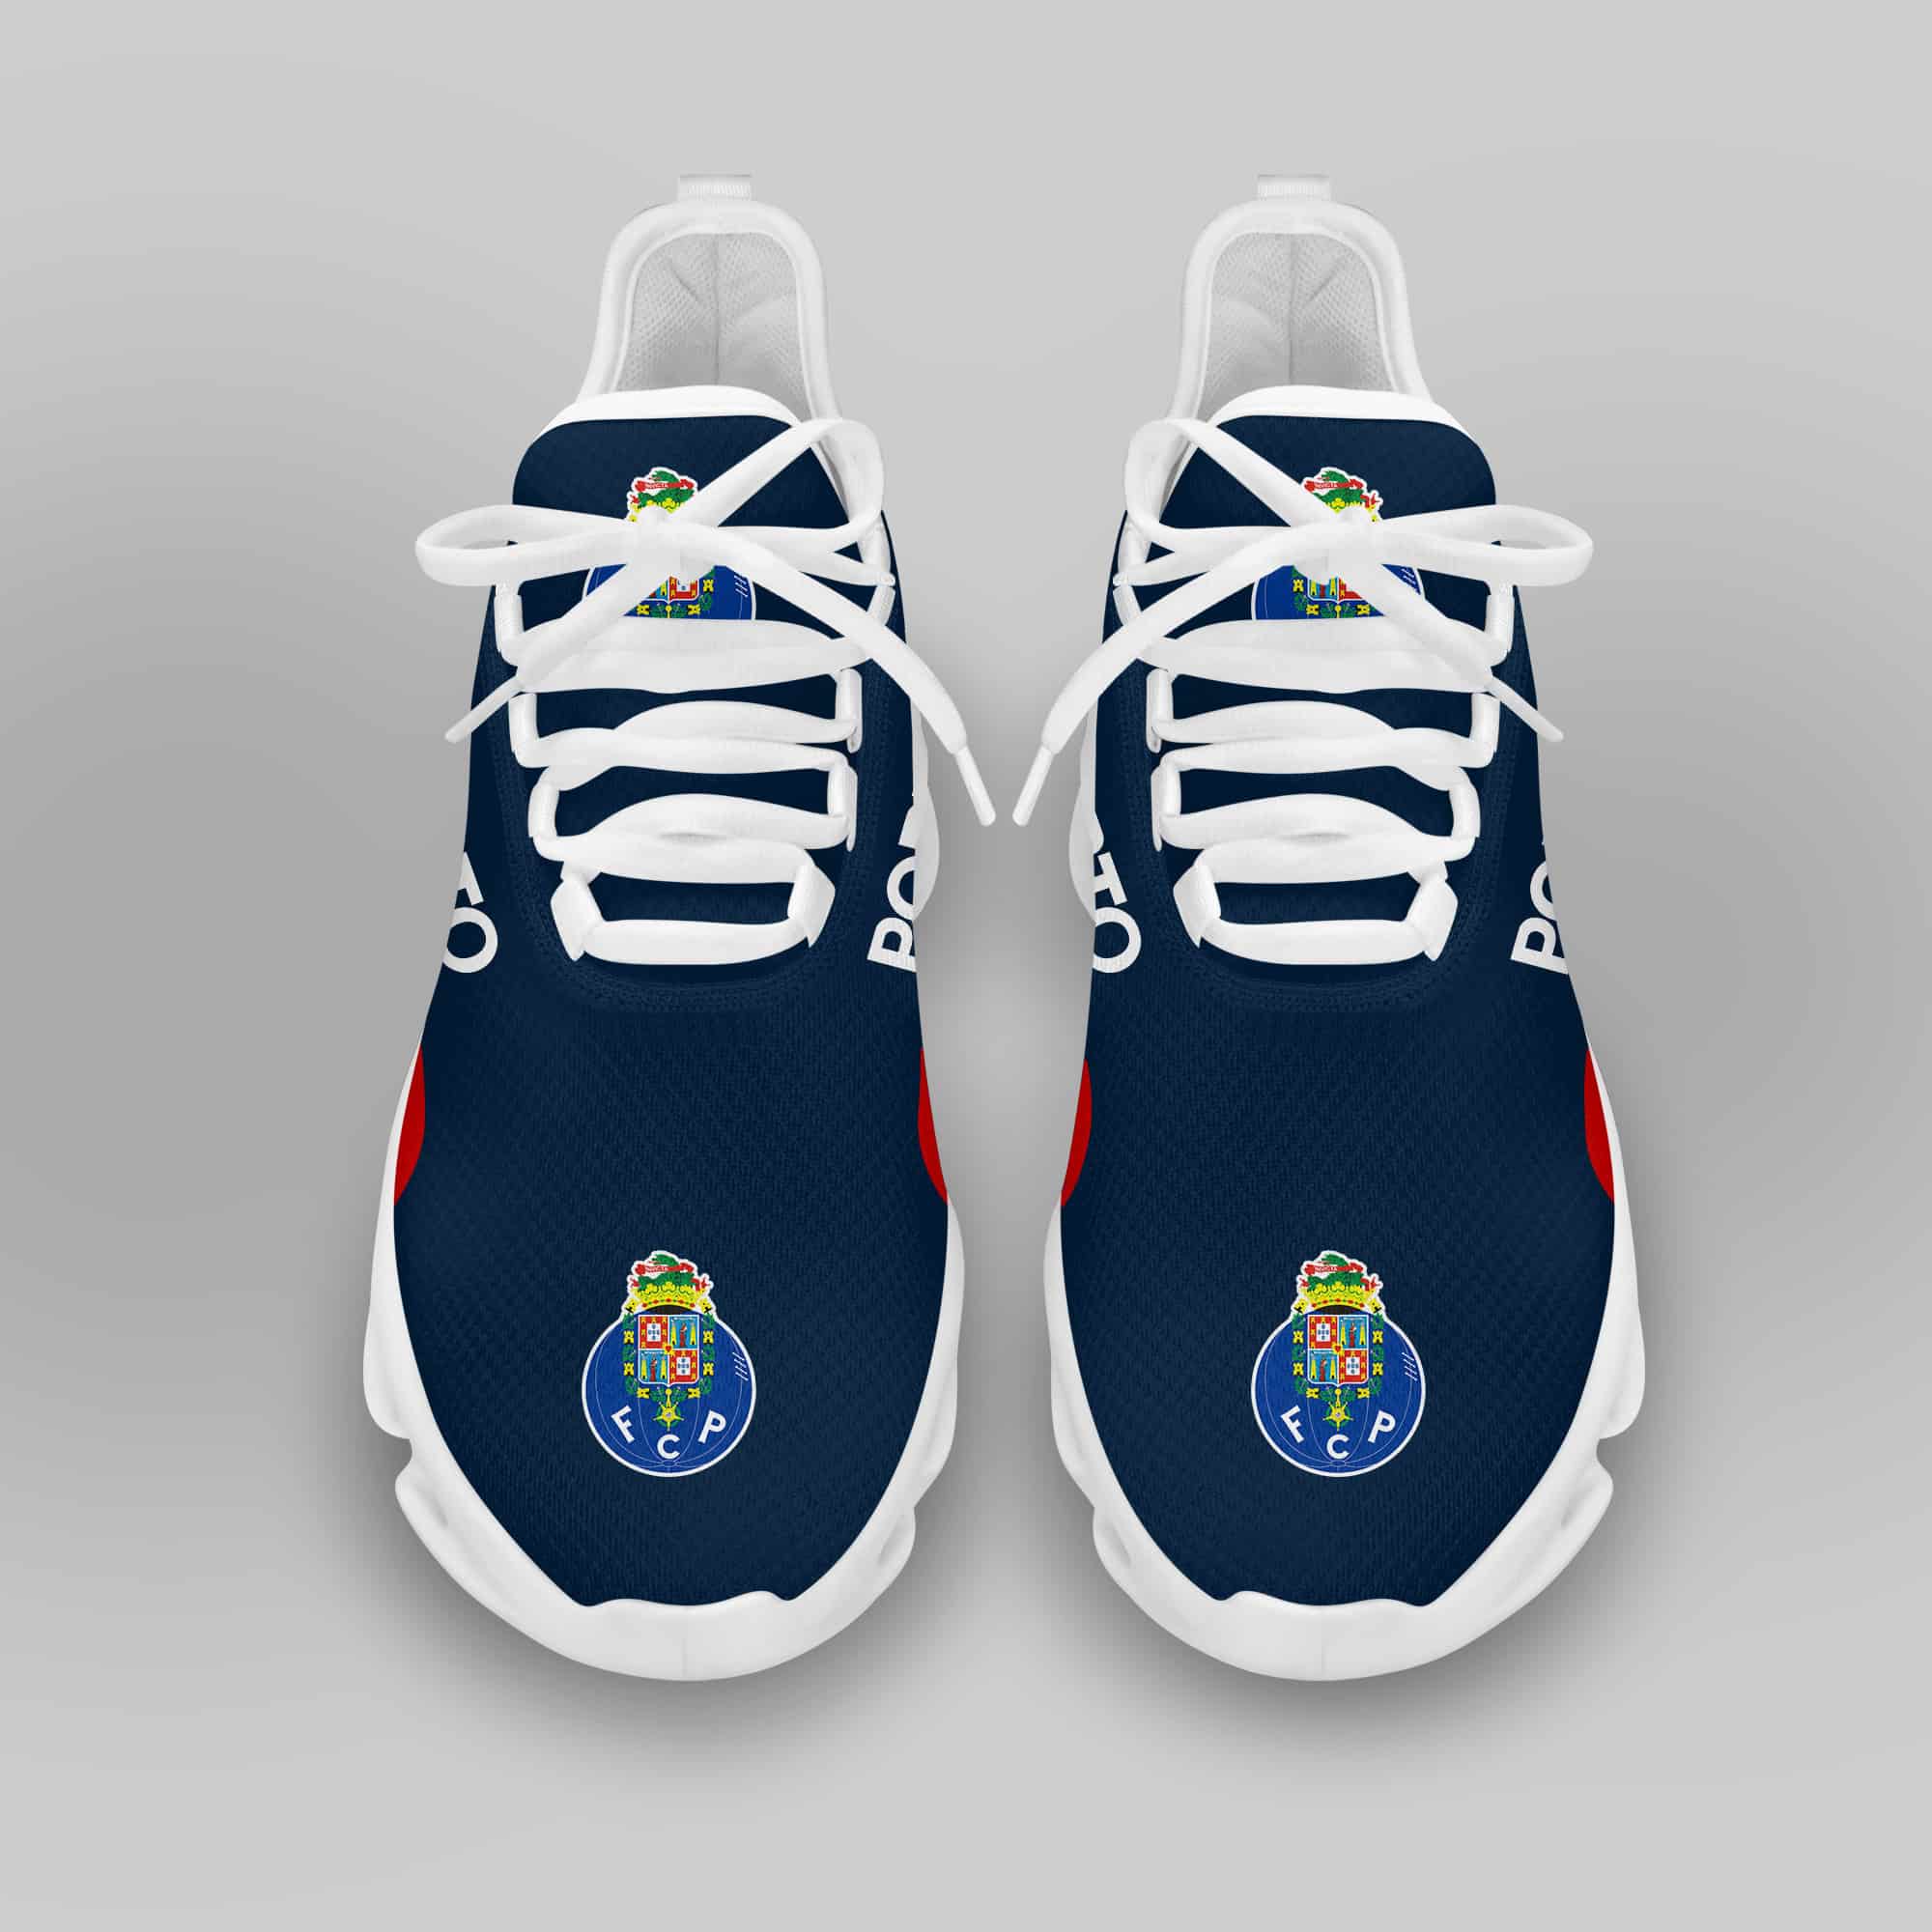 Fc Porto Running Shoes Max Soul Shoes Sneakers Ver 1 3